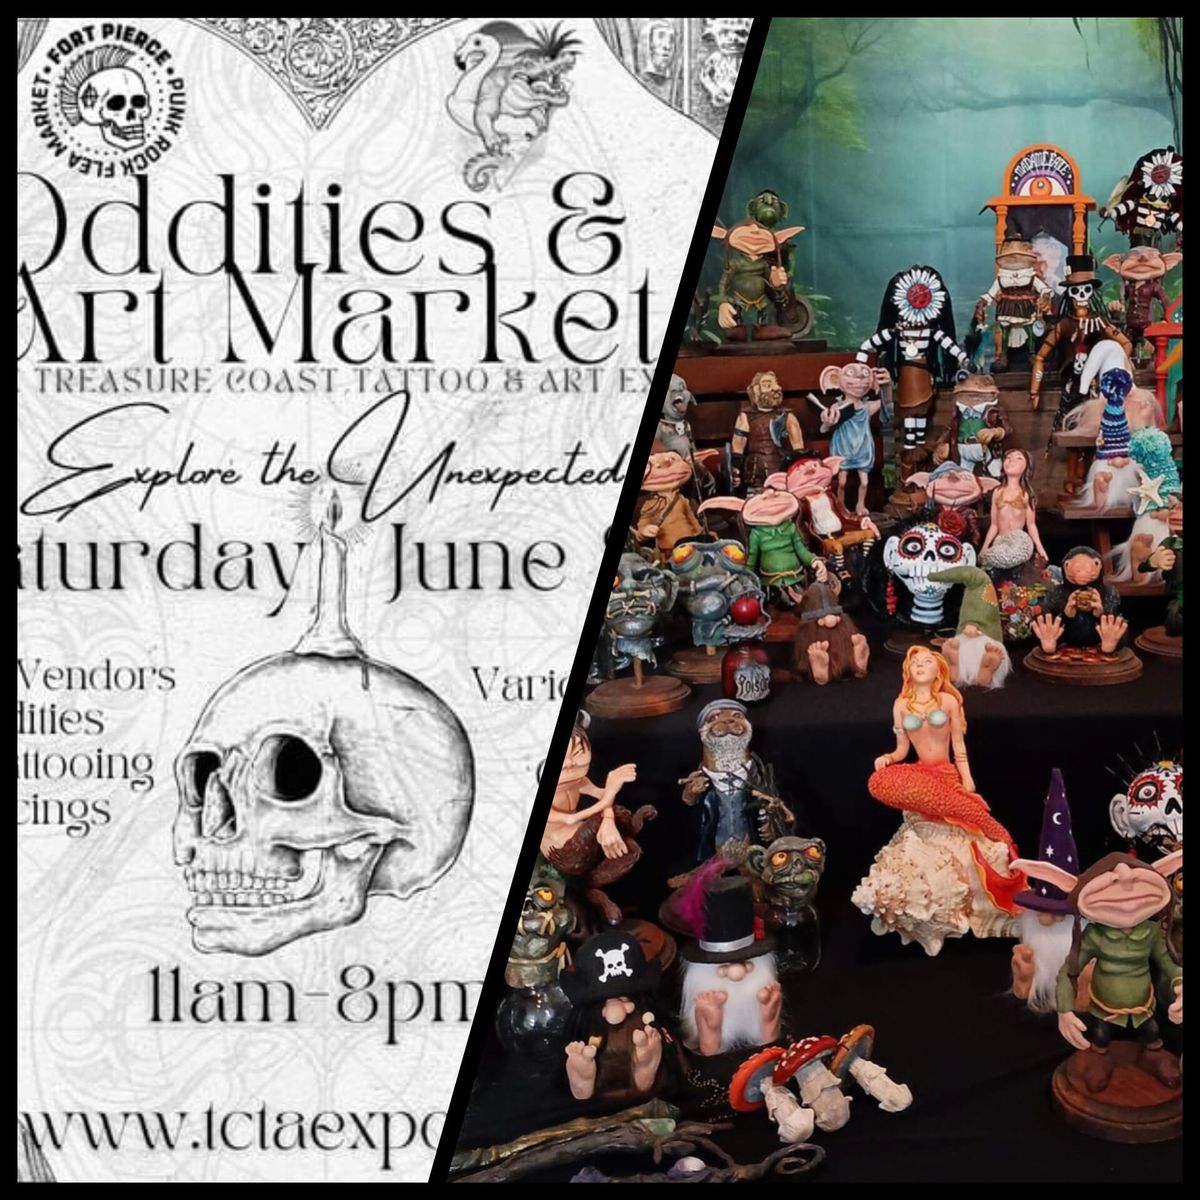 Critters of Clay @ Oddities and Art Market, South Florida